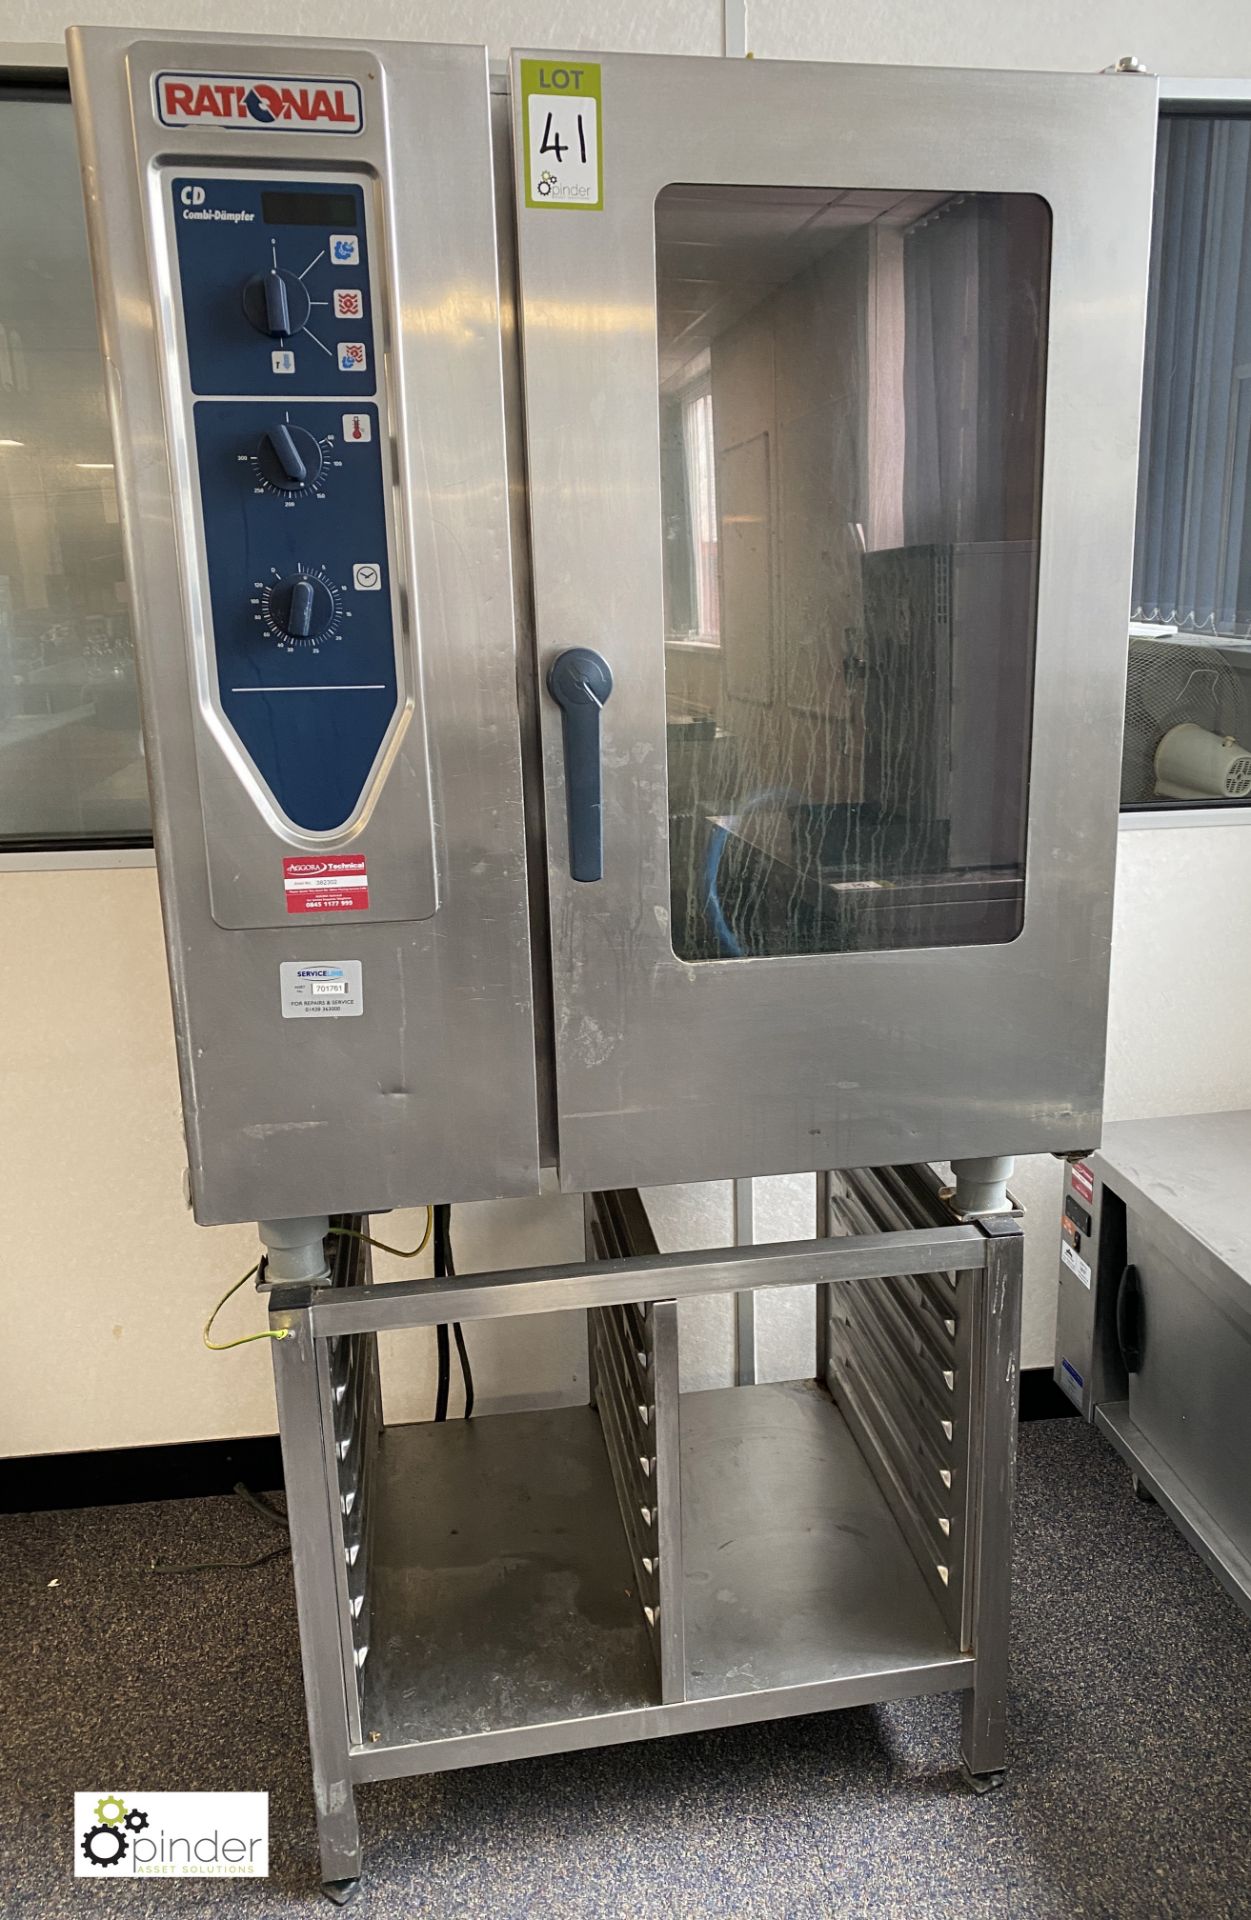 Rational CD101 Combi Dampfer Combi Oven, 10-tray, 400volts, mounted on stainless steel tray stand - Image 2 of 6